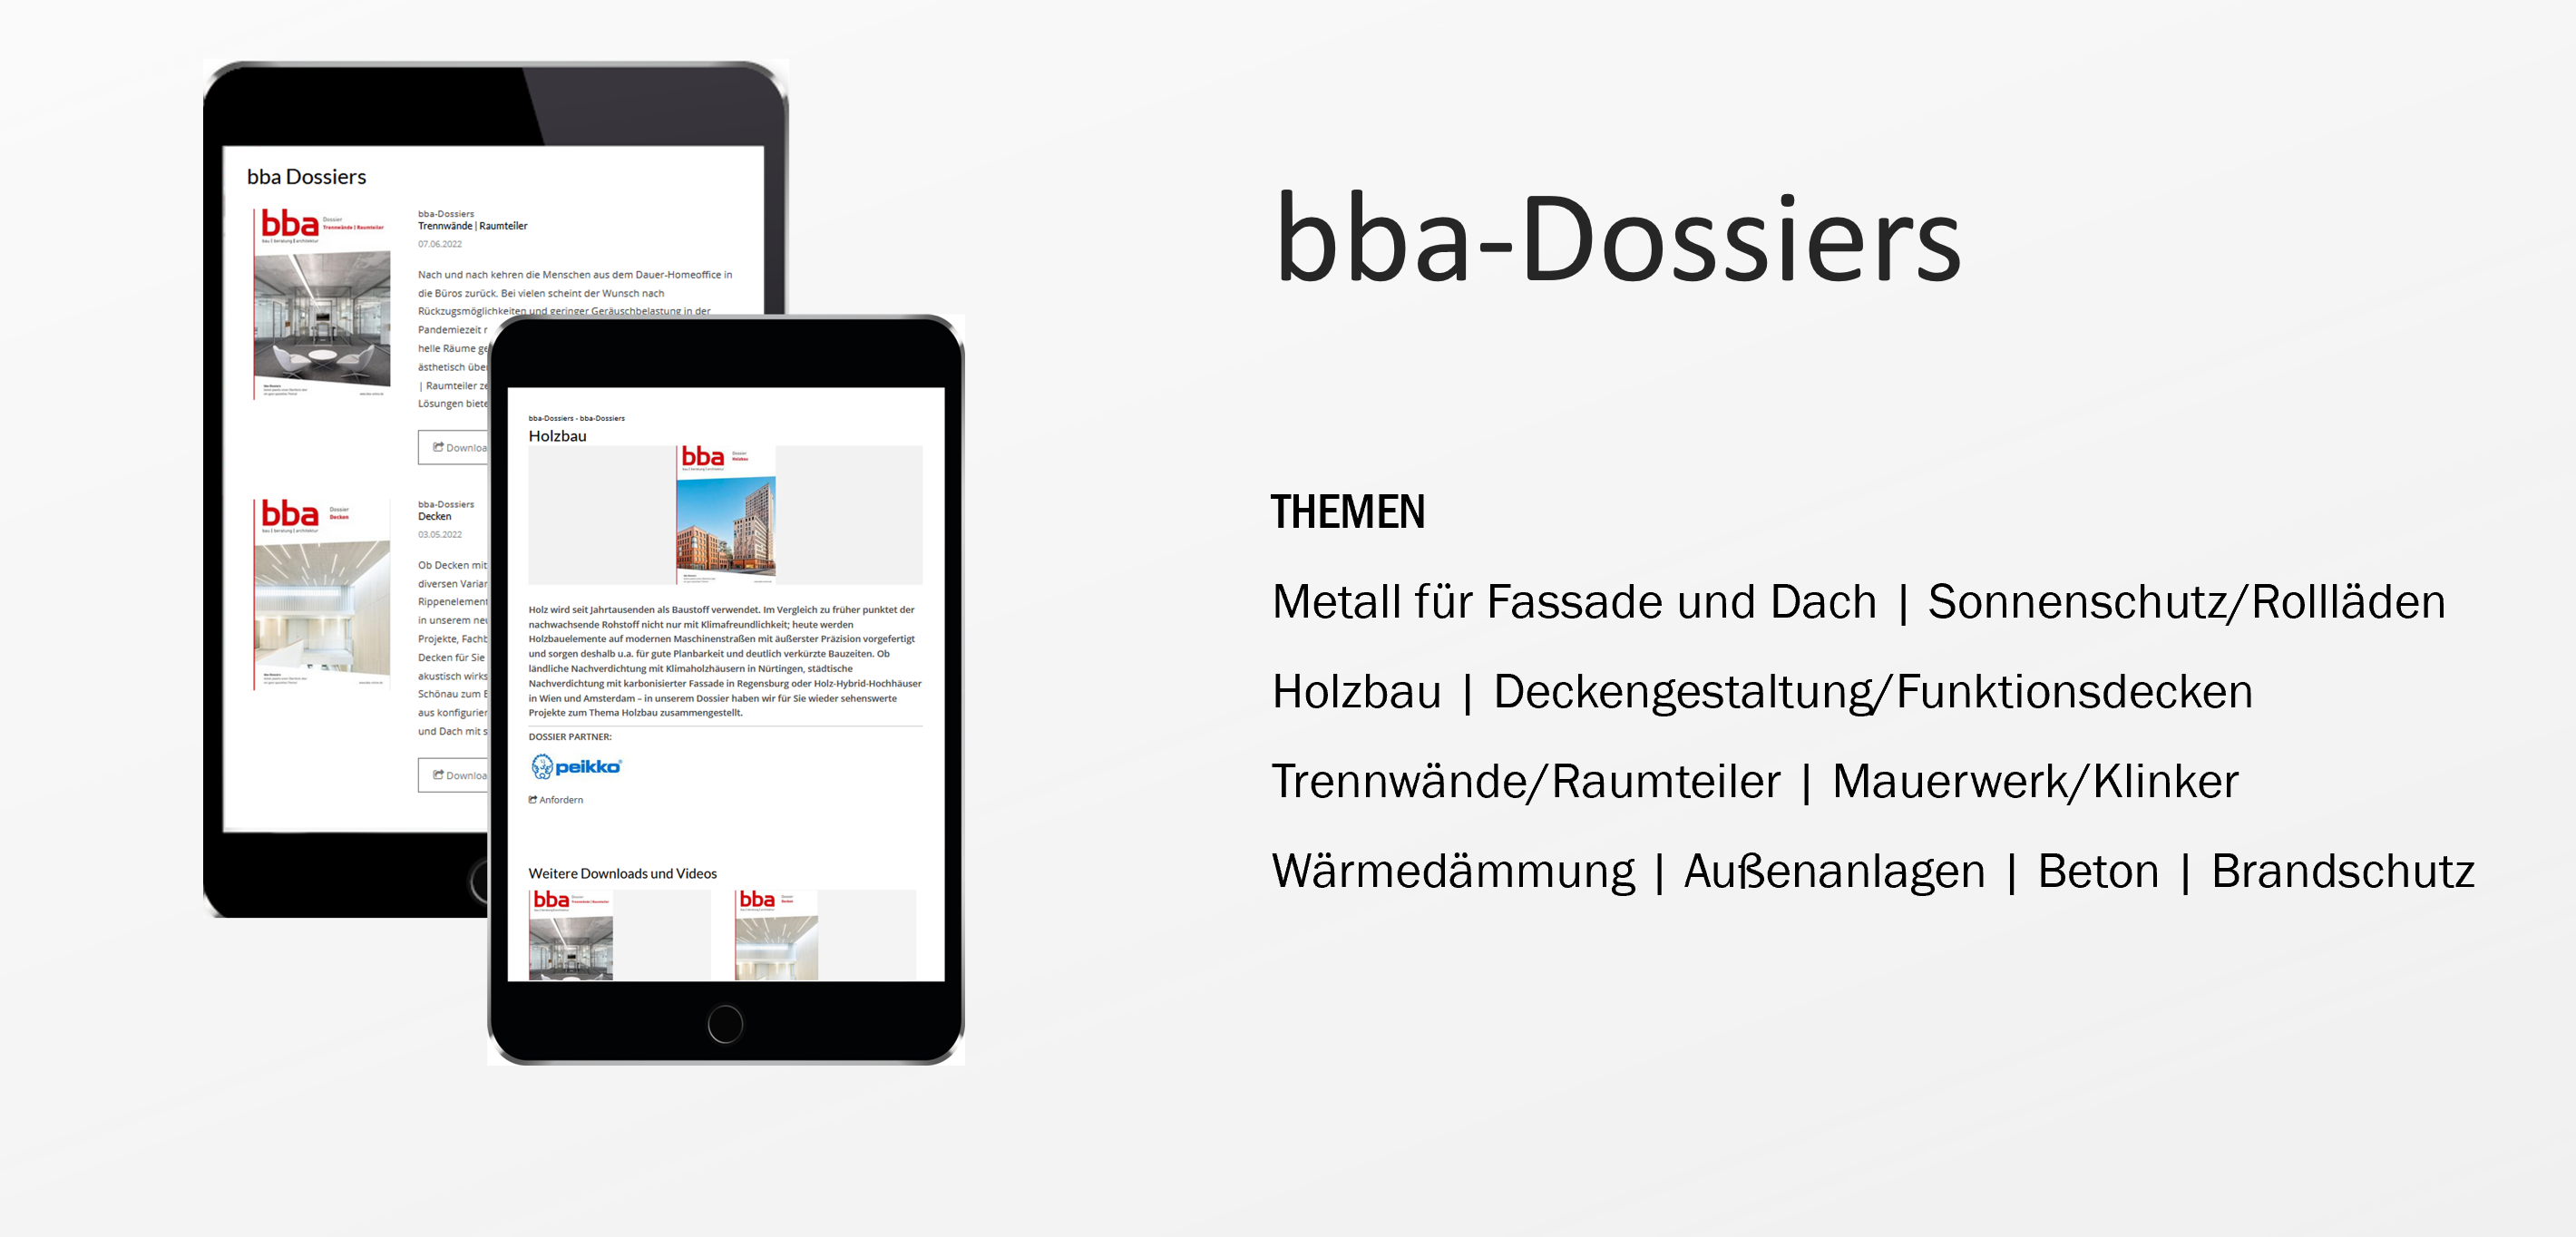 bba-Dossiers